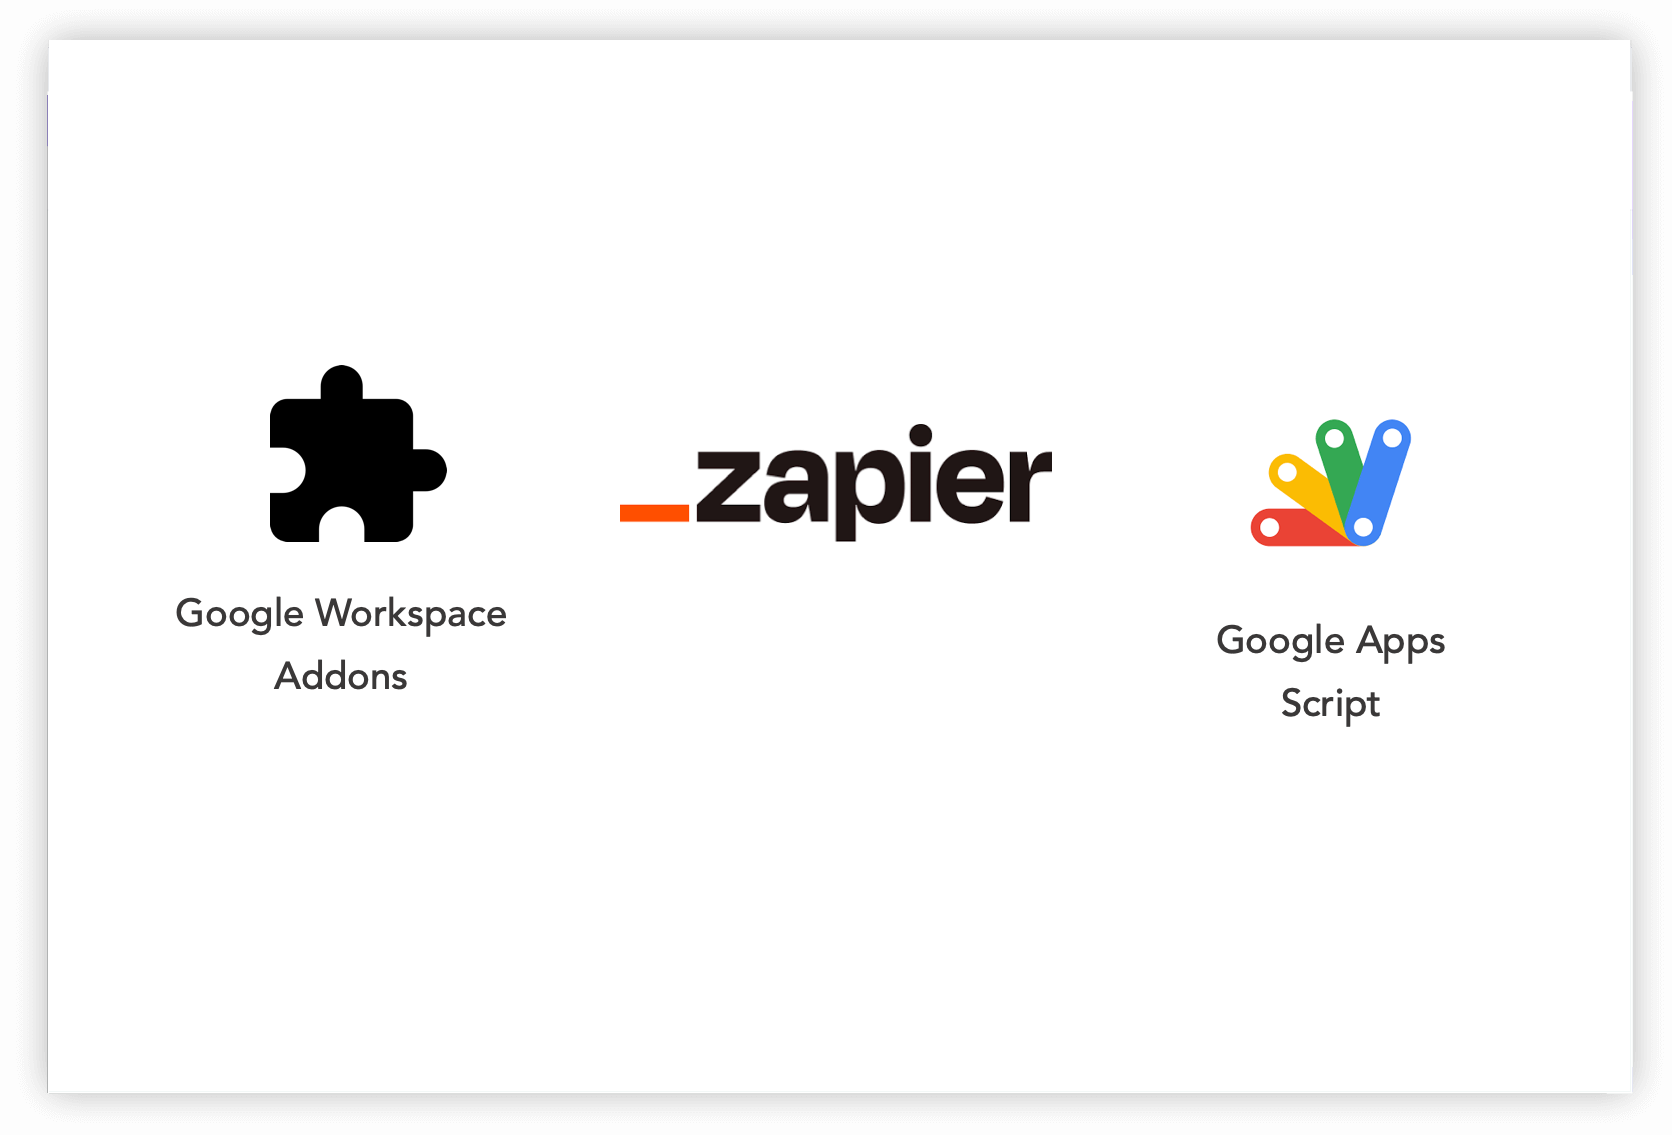 Enable unlisted links to integrate using Apps script, Zapier, forms addons